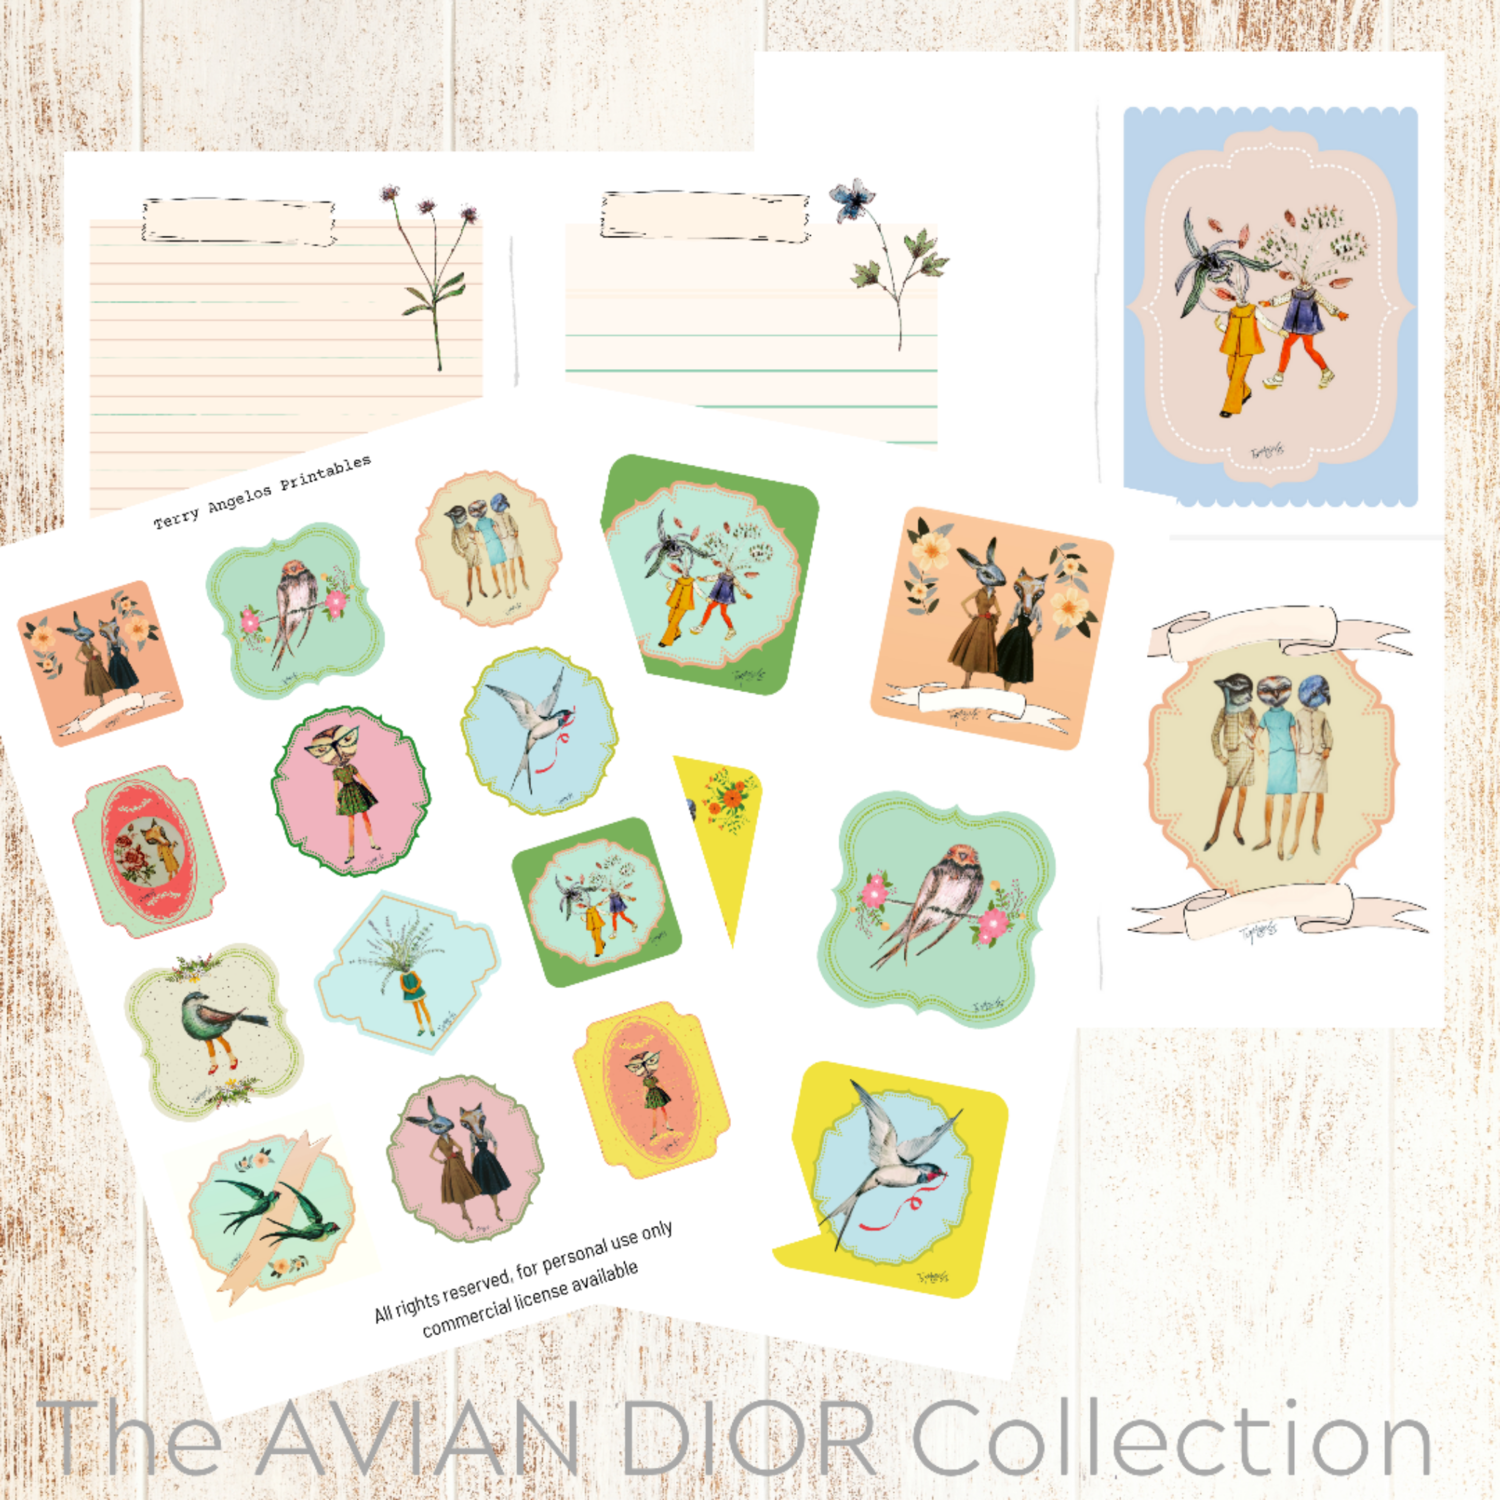 The AVIAN DIOR Collection